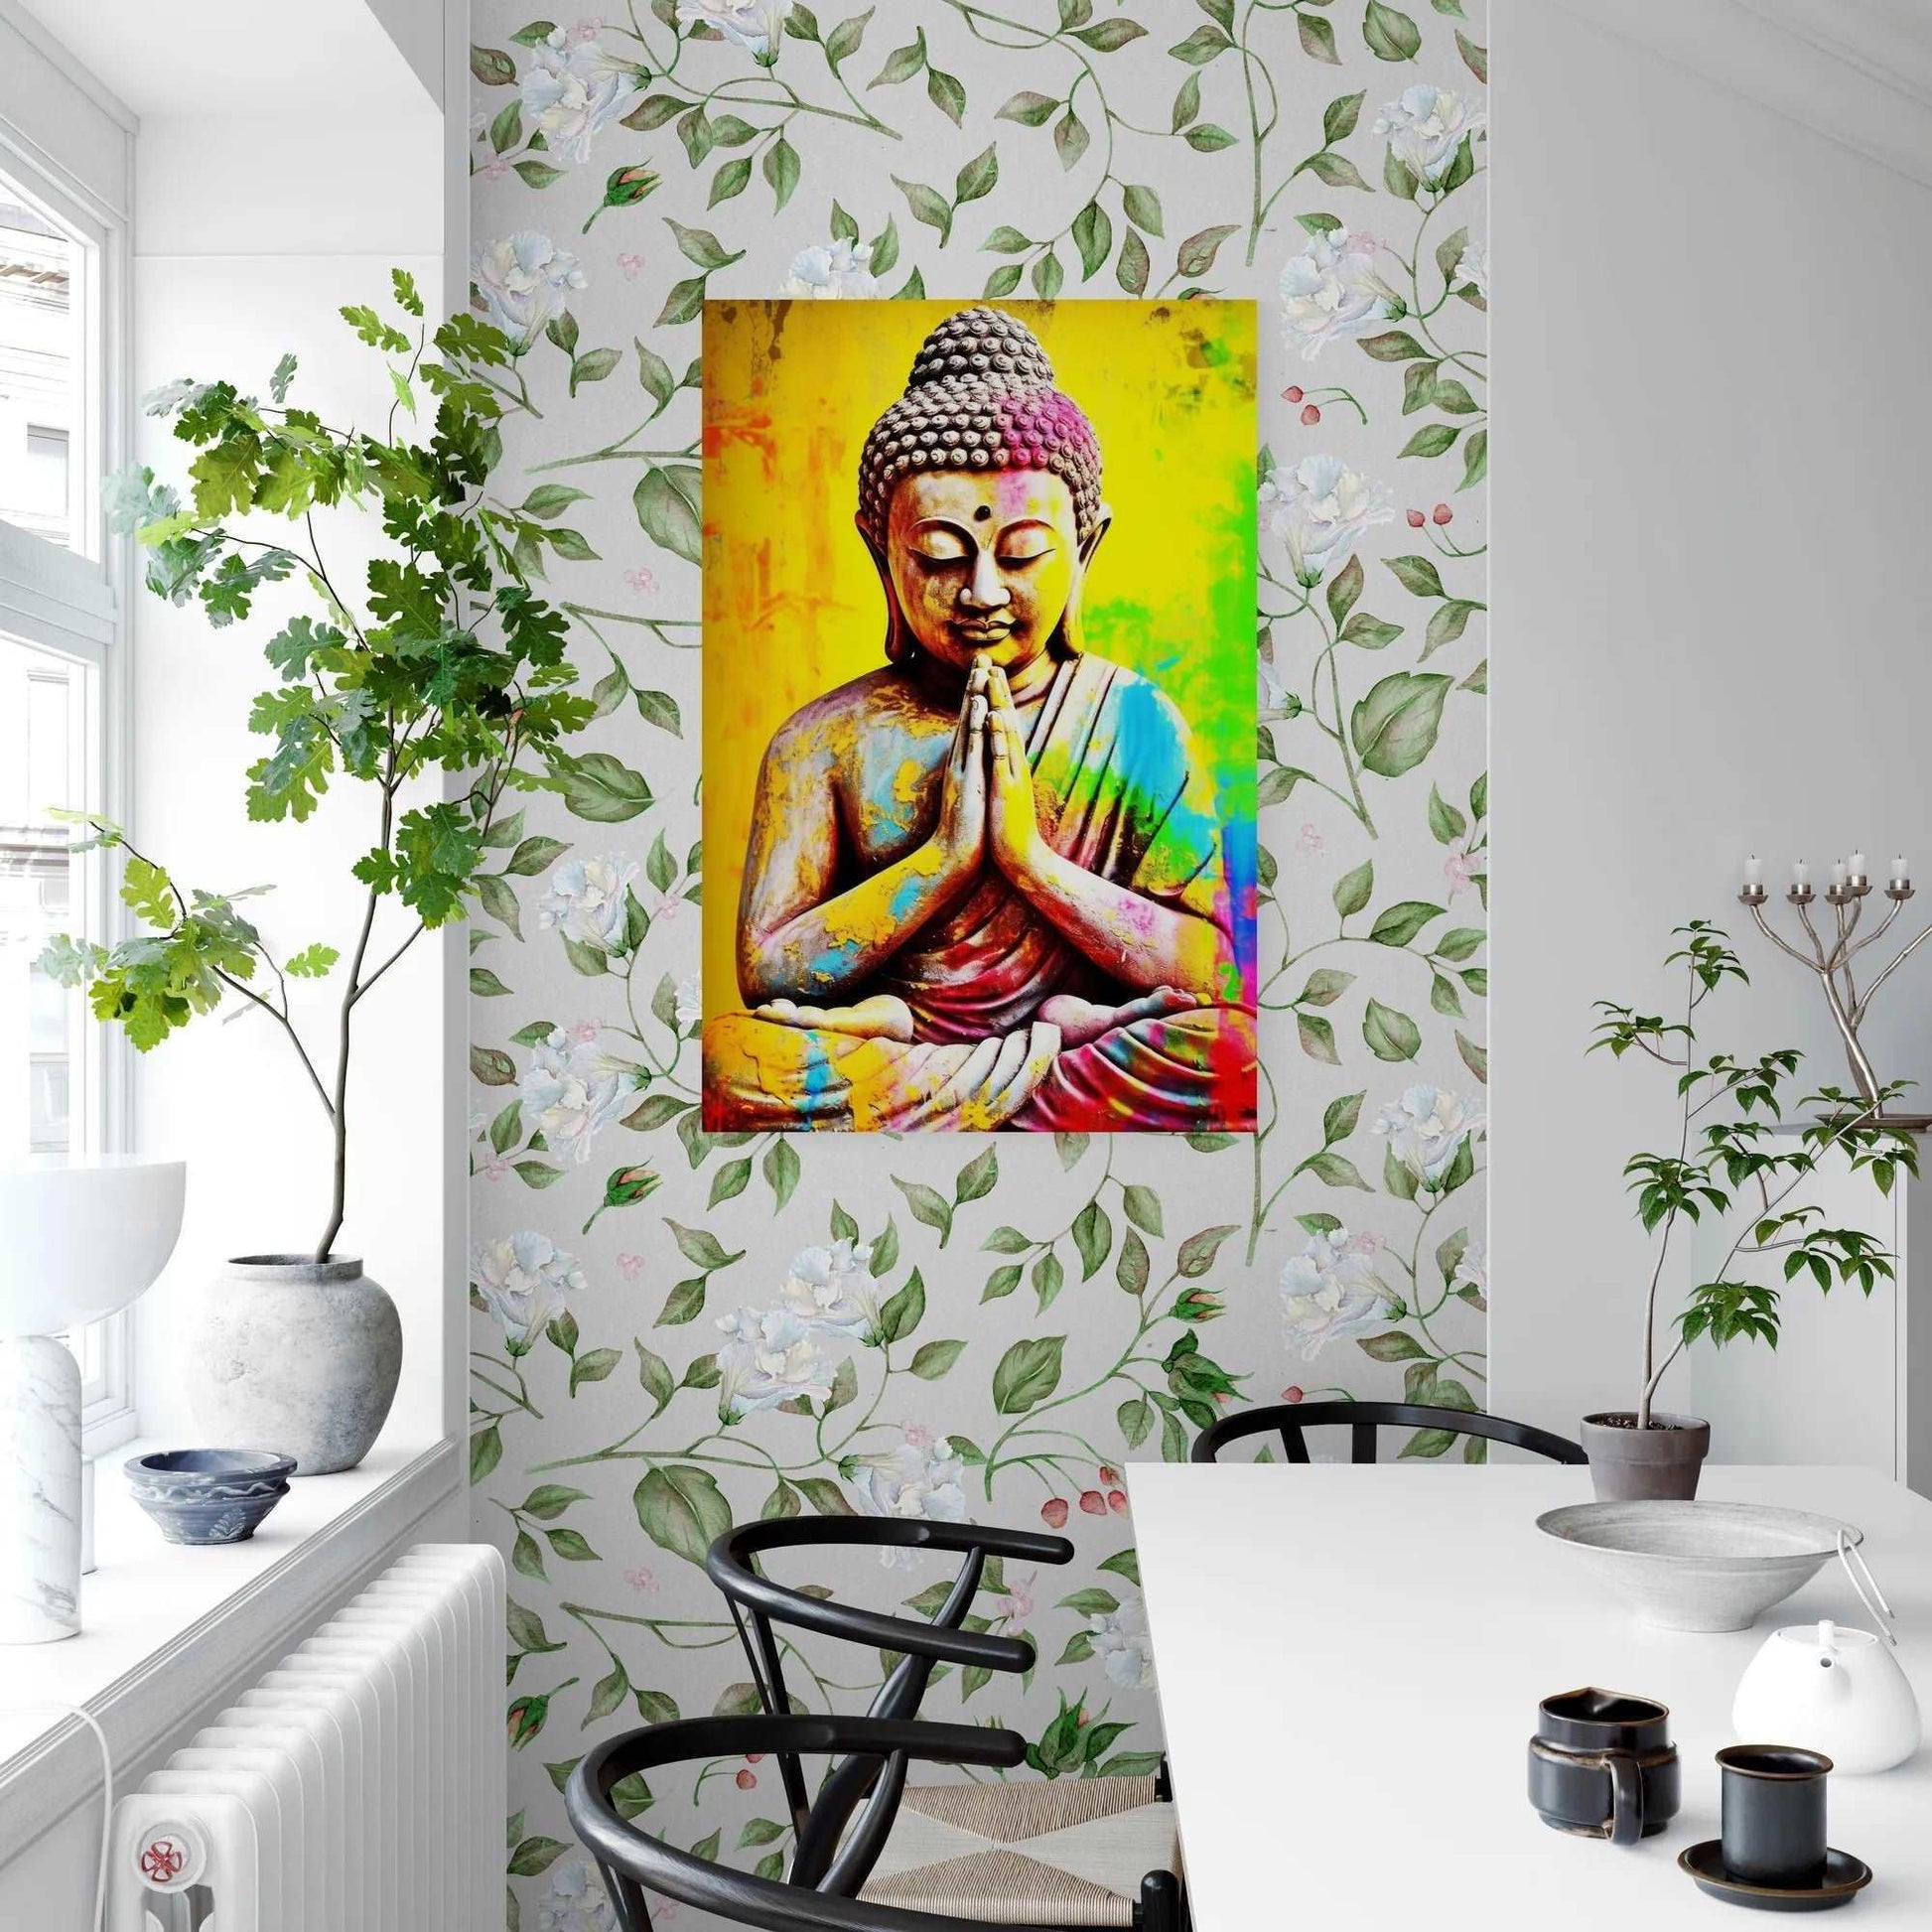 Colorful Buddha painting with a rainbow-hued background, creating a focal point on a wall adorned with floral wallpaper, complemented by a modern dining area with black chairs and a white table.